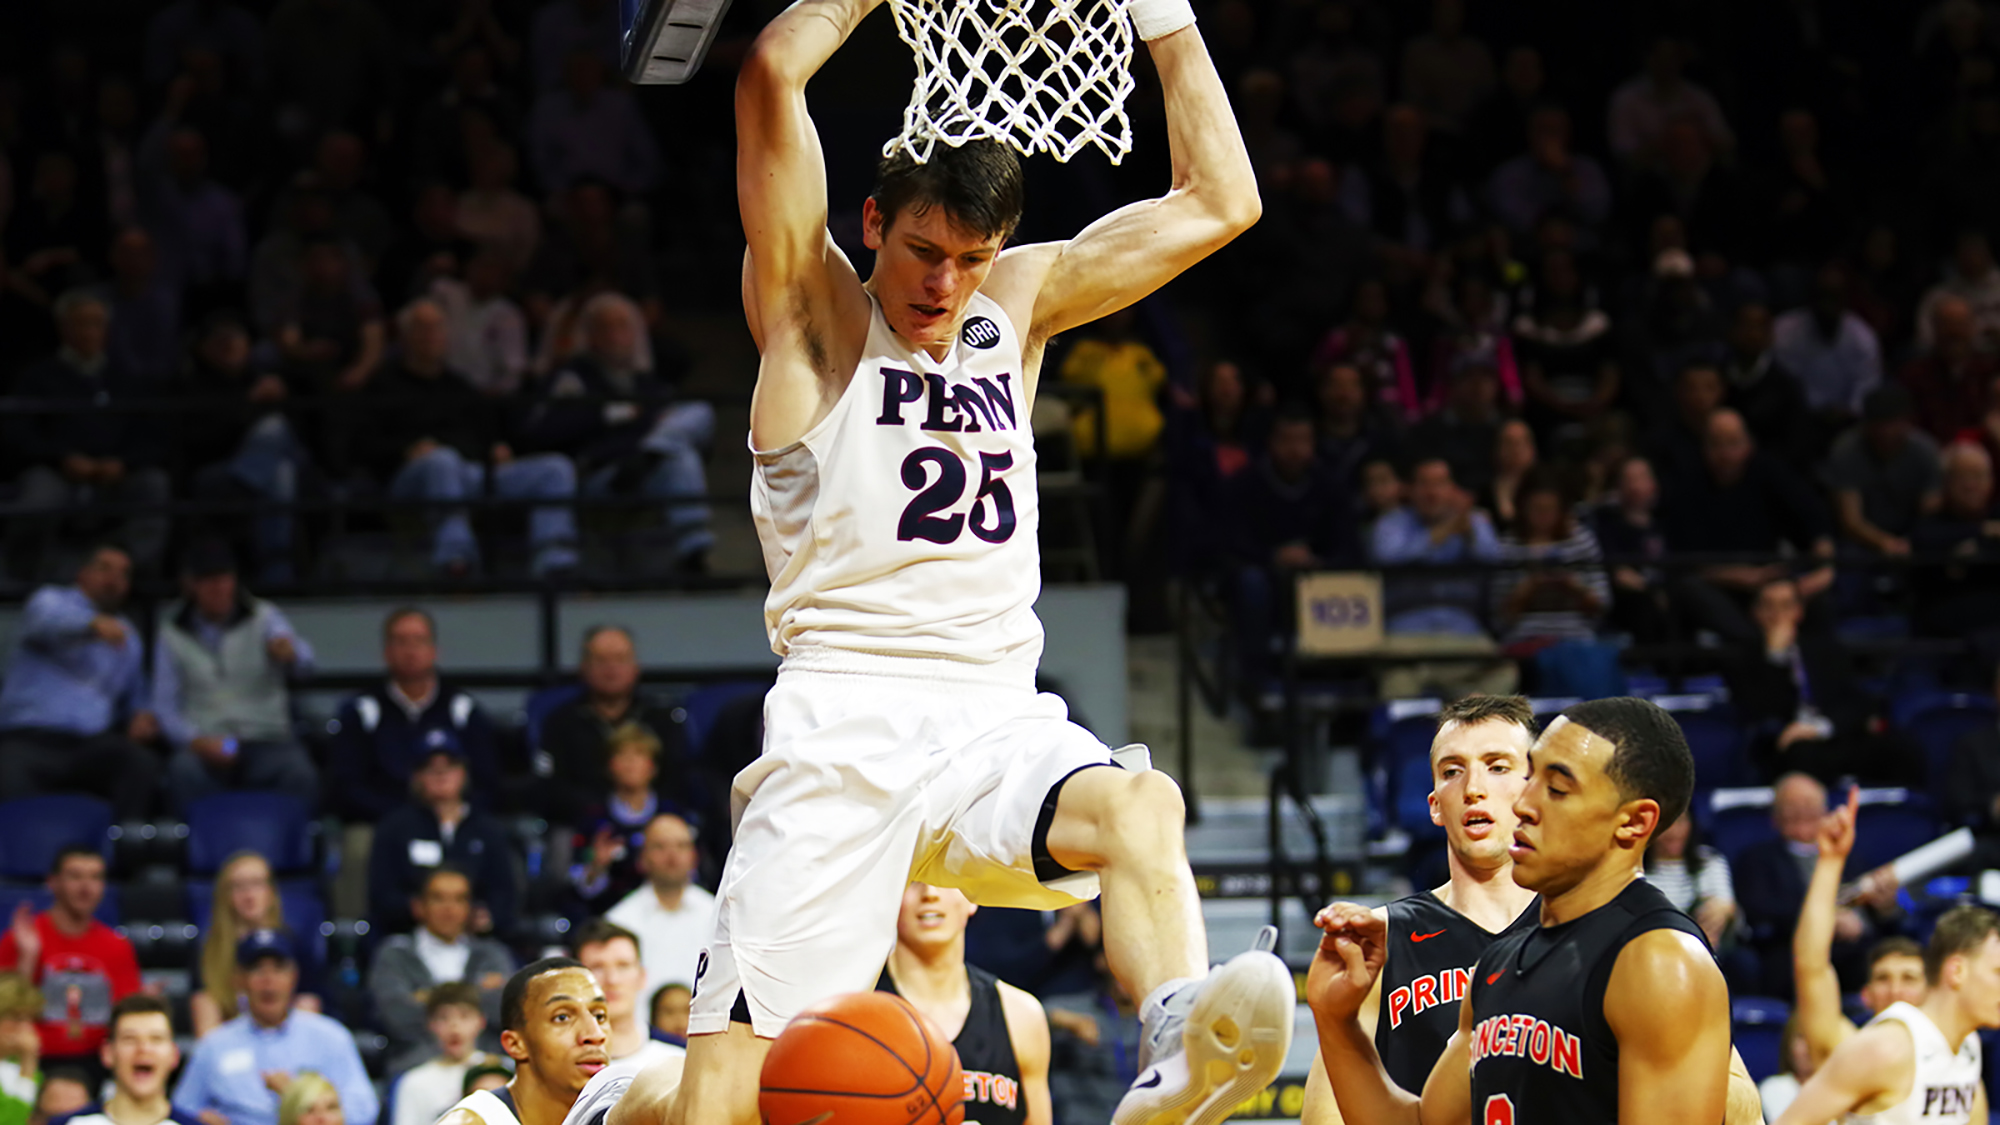 Brodeur dunks the ball against Princeton